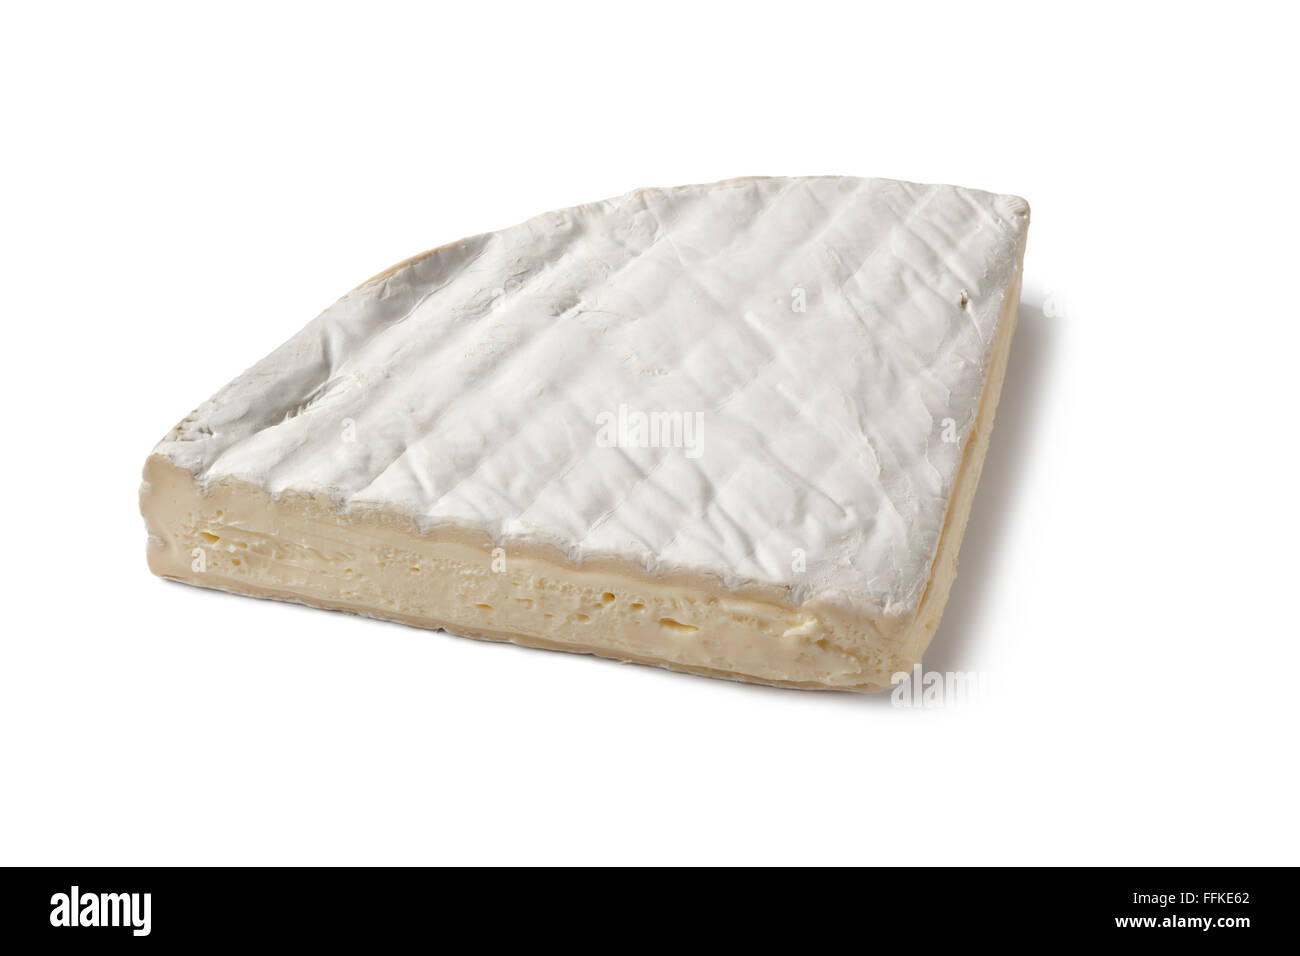 Quarter of French Brie cheese on white background Stock Photo